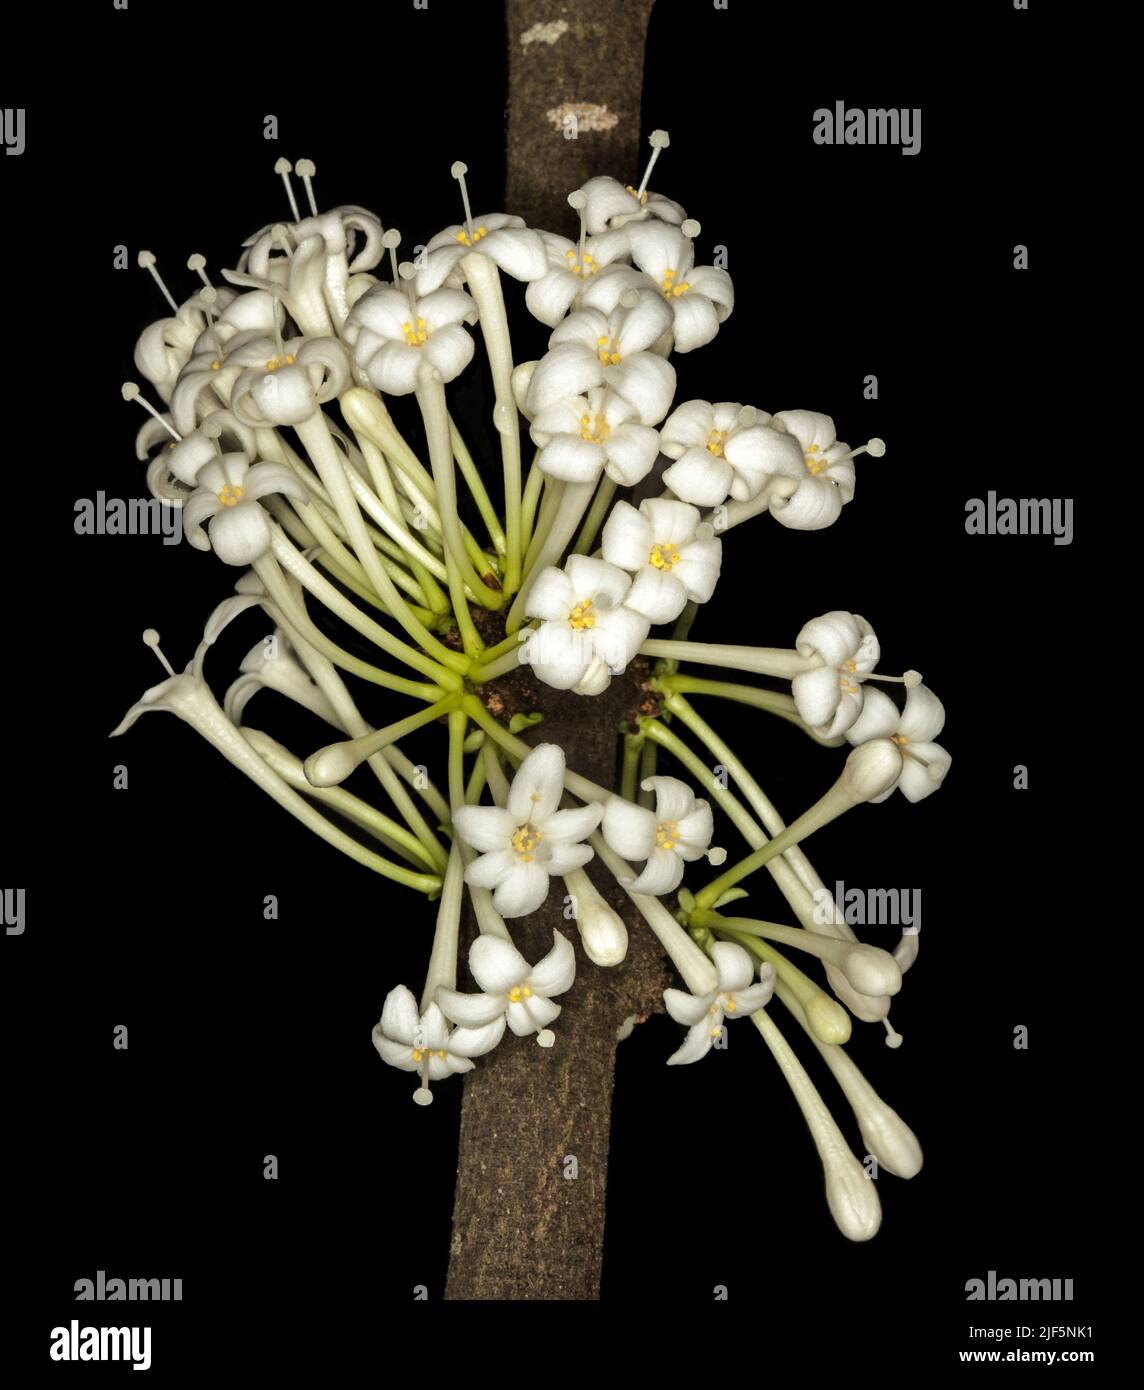 Cluster of white perfumed flowers of Phaleria clerodendron, Scented Daphne, sprouting from trunk of this Australian native rainforest tree Stock Photo